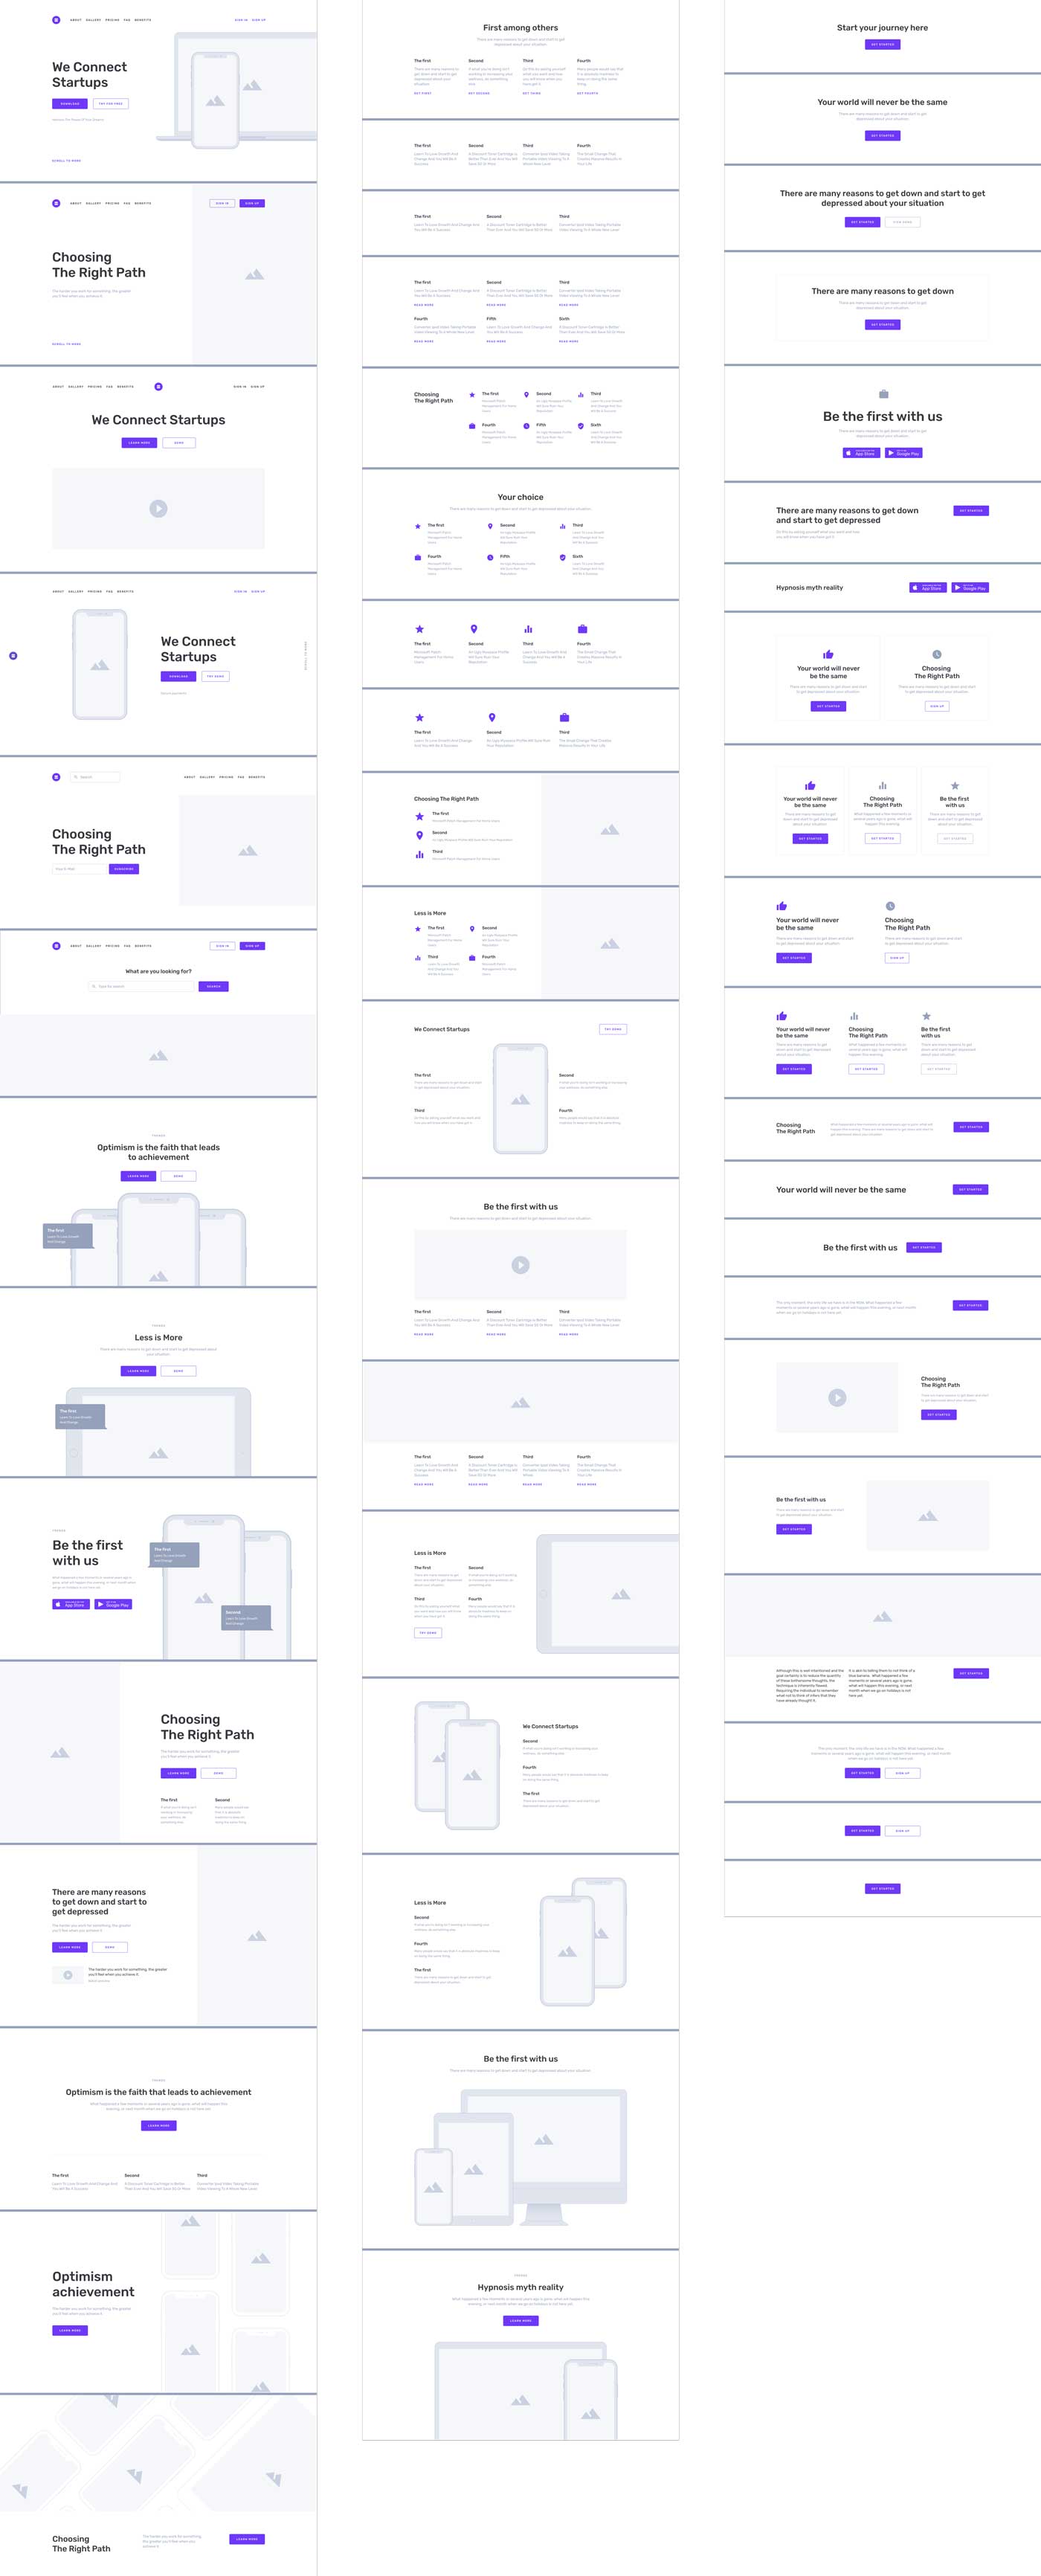 Containers Web Wireframe Kit线框图工具包 .fig .xd .sketch素材下载